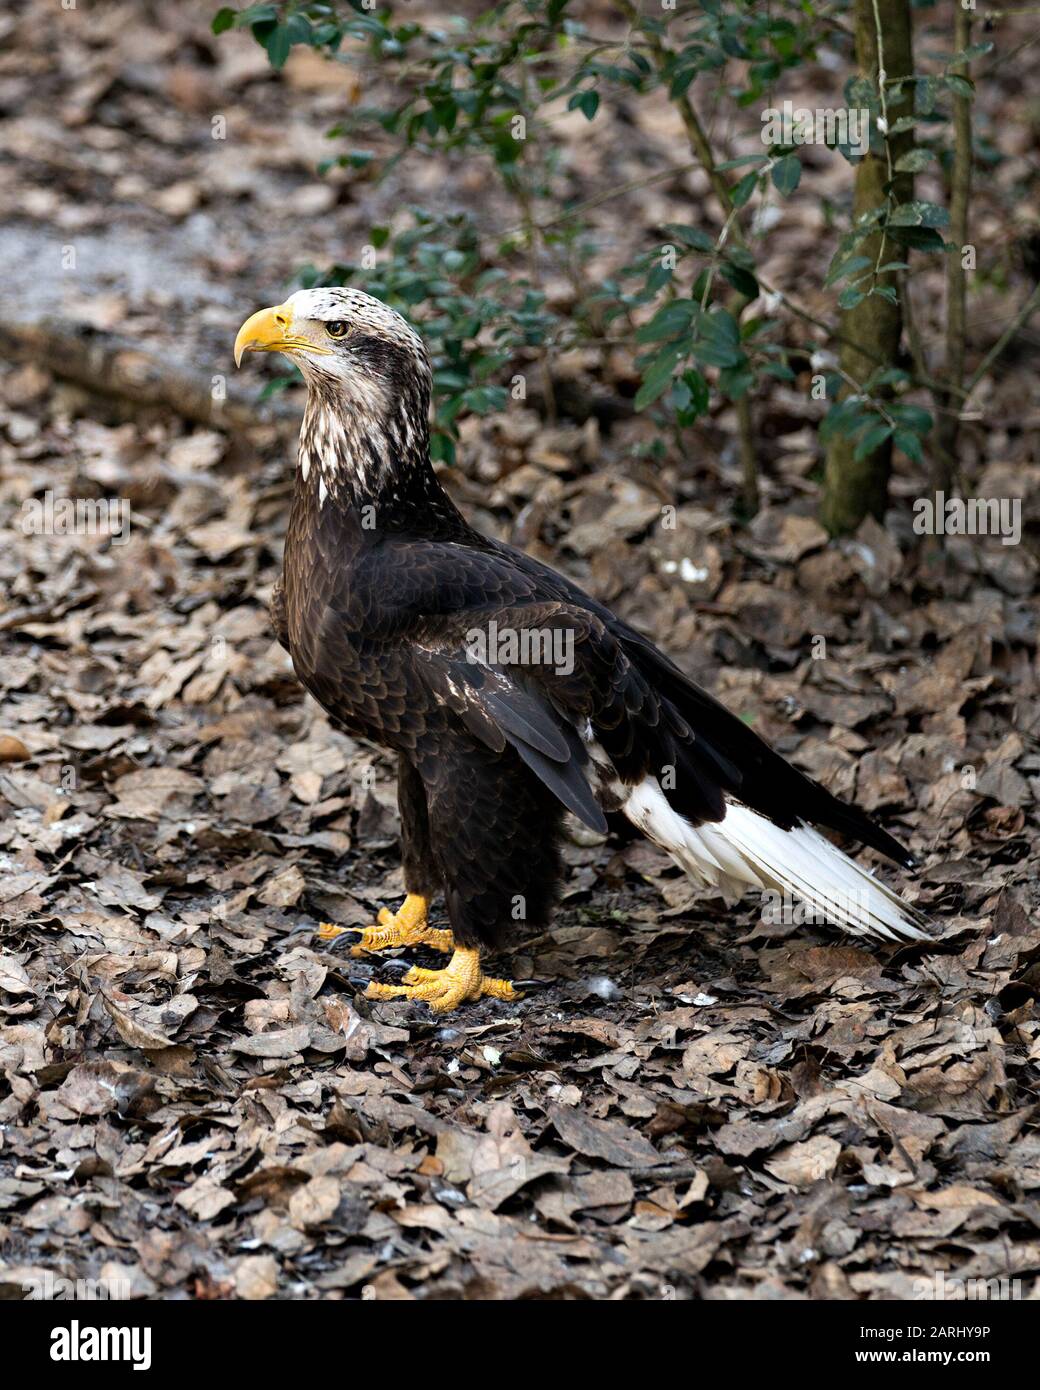 Bald Eagle Juvenile bird close-up profile view displaying feathers, white head, eye, beak, talons, plumage, white tail, in its surrounding and environ Stock Photo